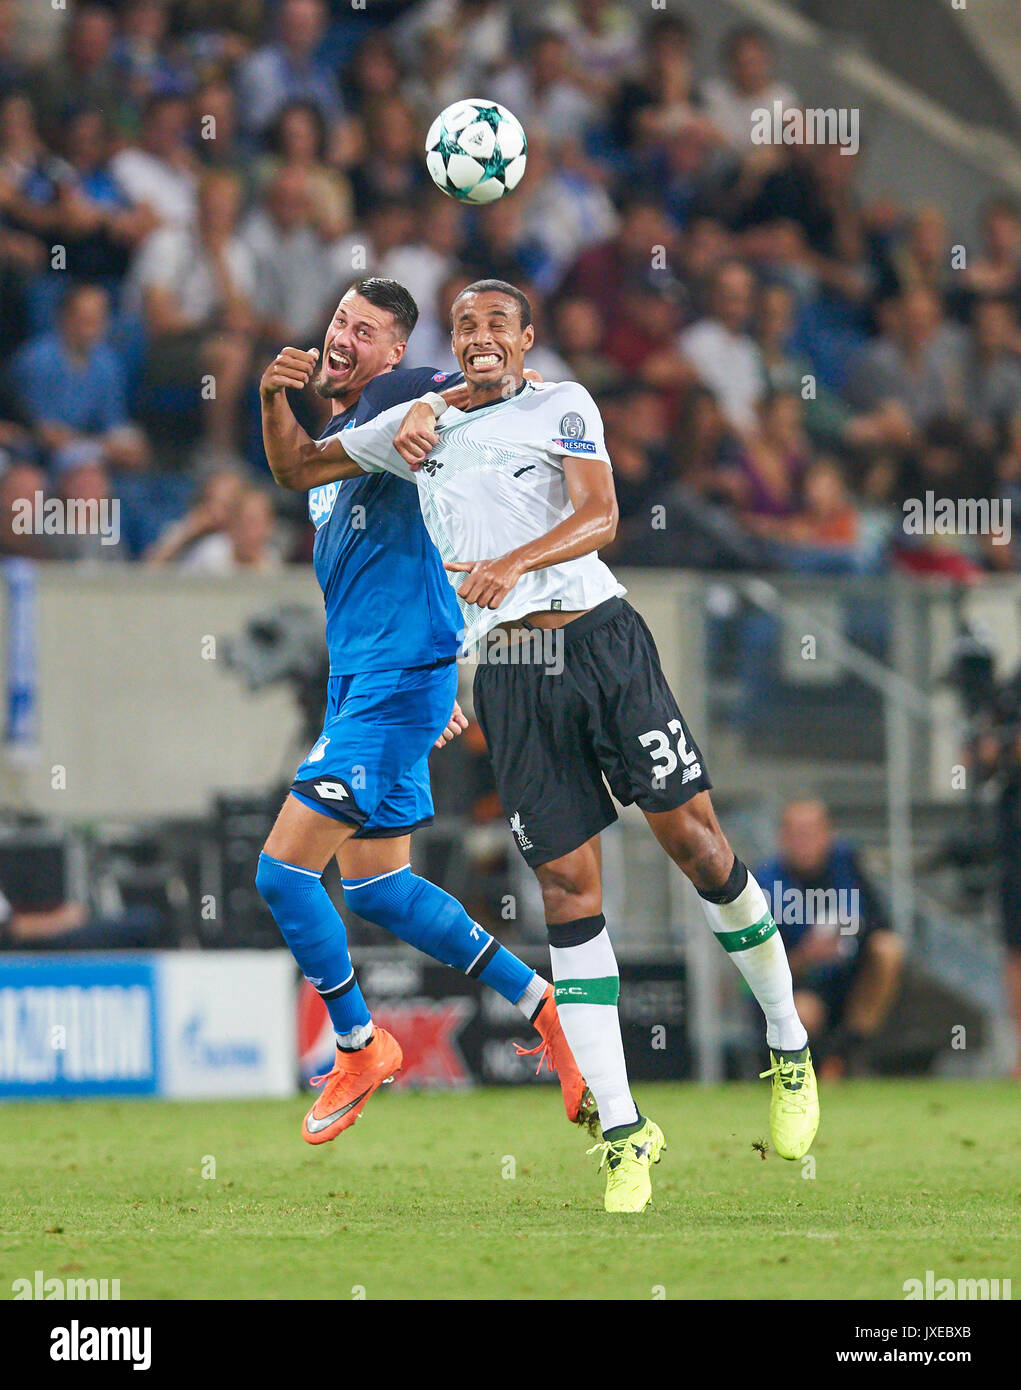 Hoffenheim, Germany. 15th Aug, 2017. Joel MATIP, LIV 32 compete for the  ball against Sandro WAGNER, Hoff 14 in the Qualification TSG 1899  HOFFENHEIM - LIVERPOOL FC for the UEFA Champions League